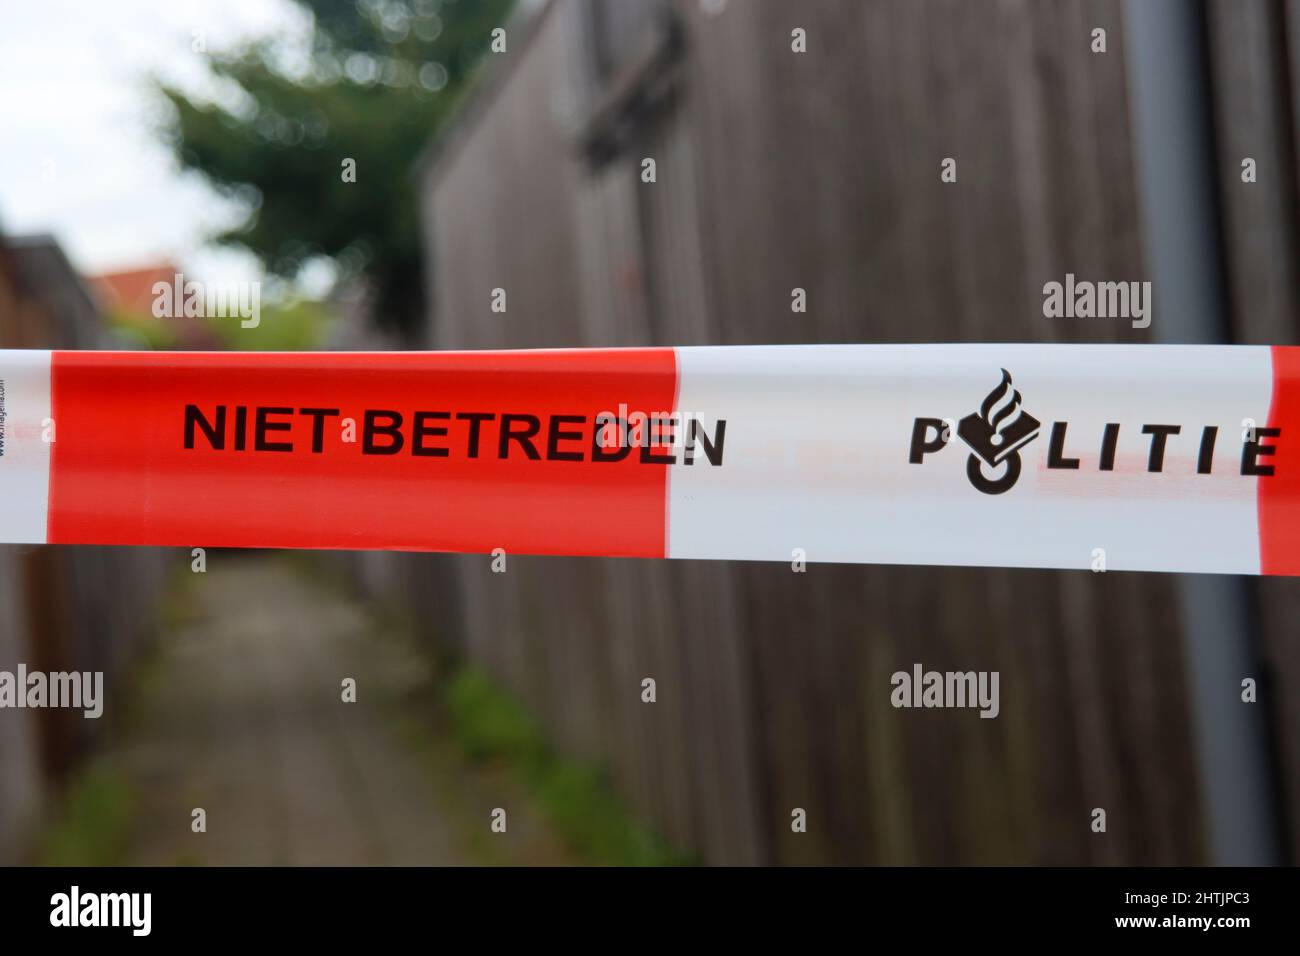 Police lint to block crime scene in Rotterdam with dutch text Politie Niet Betreden (no access) in the Netherlands Stock Photo